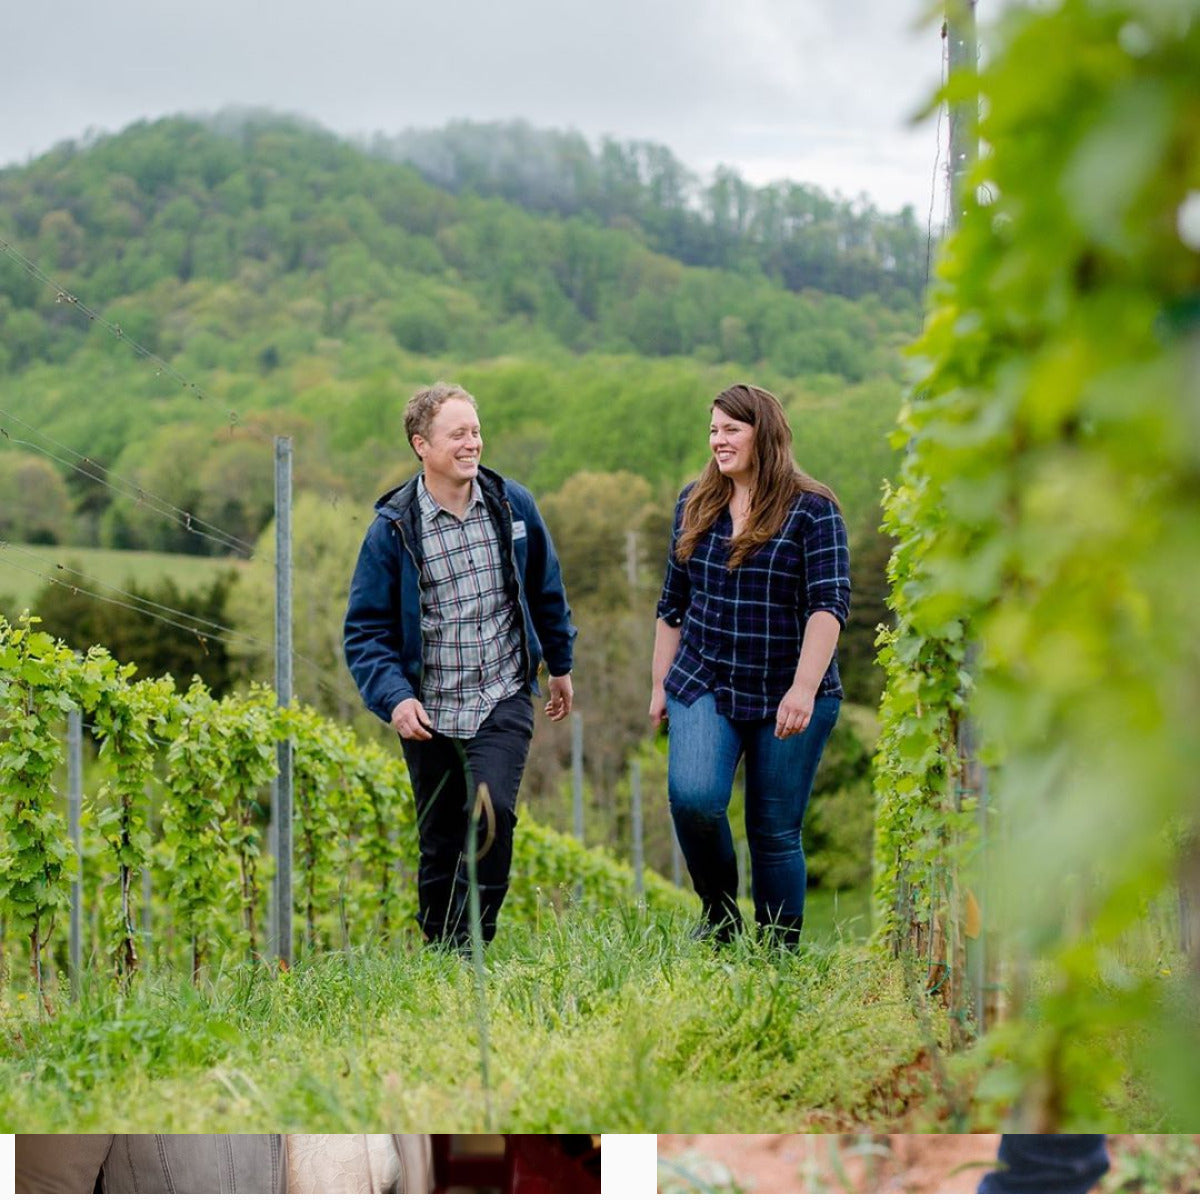 The Early Days Are Exciting: Virginia Wines' Emerging Originality